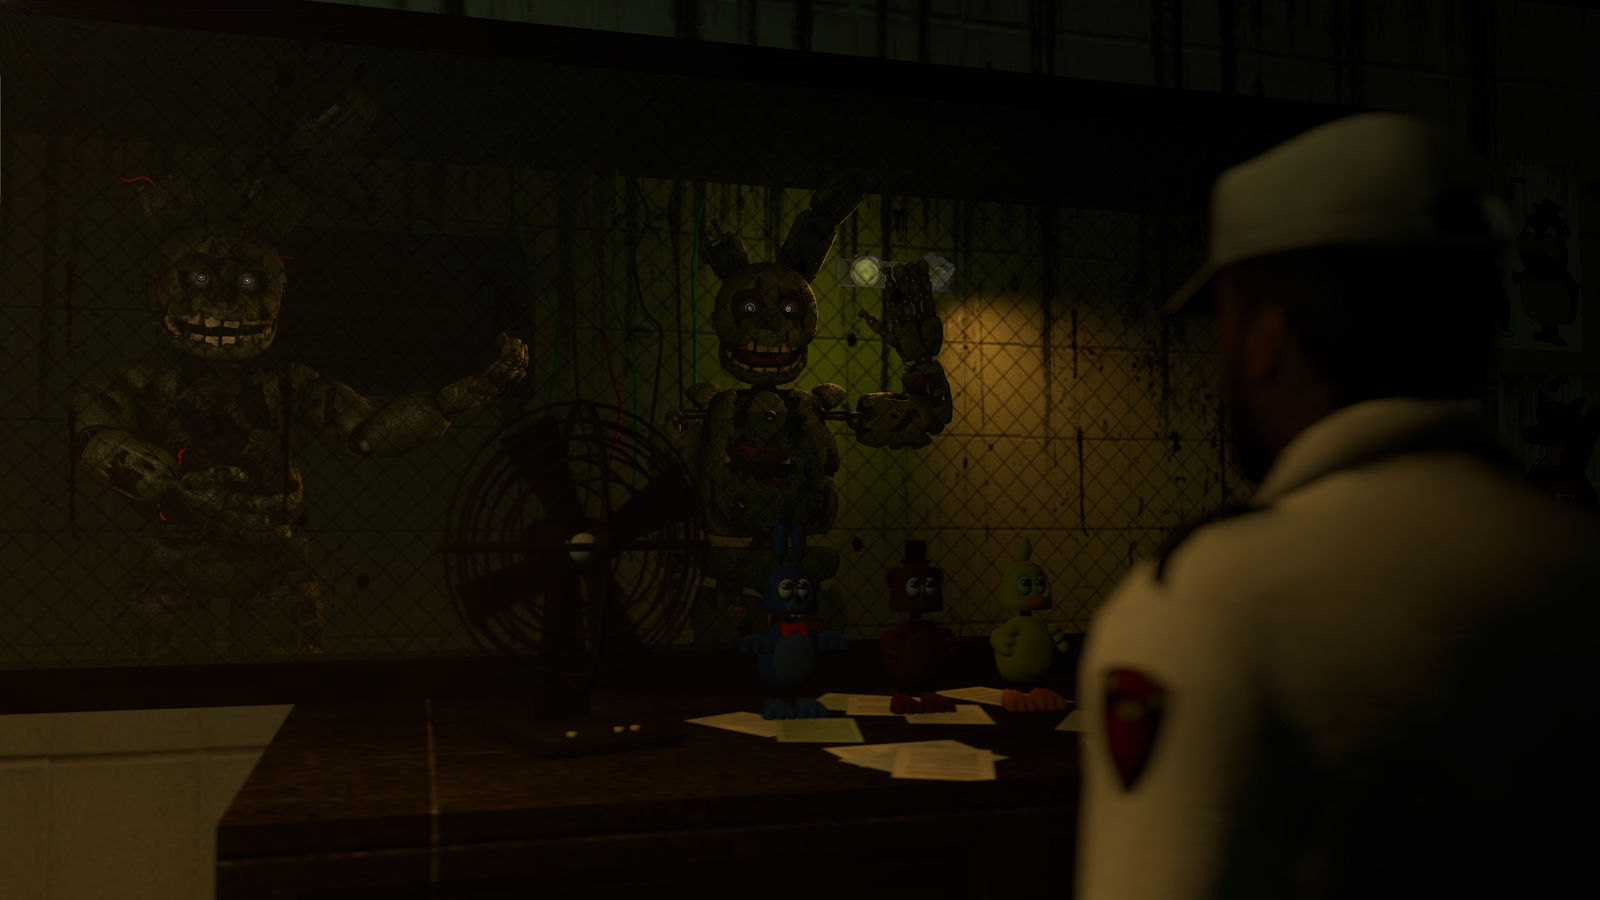 Five Nights at Freddy's 3 - Springtrap by Christian2099 on DeviantArt